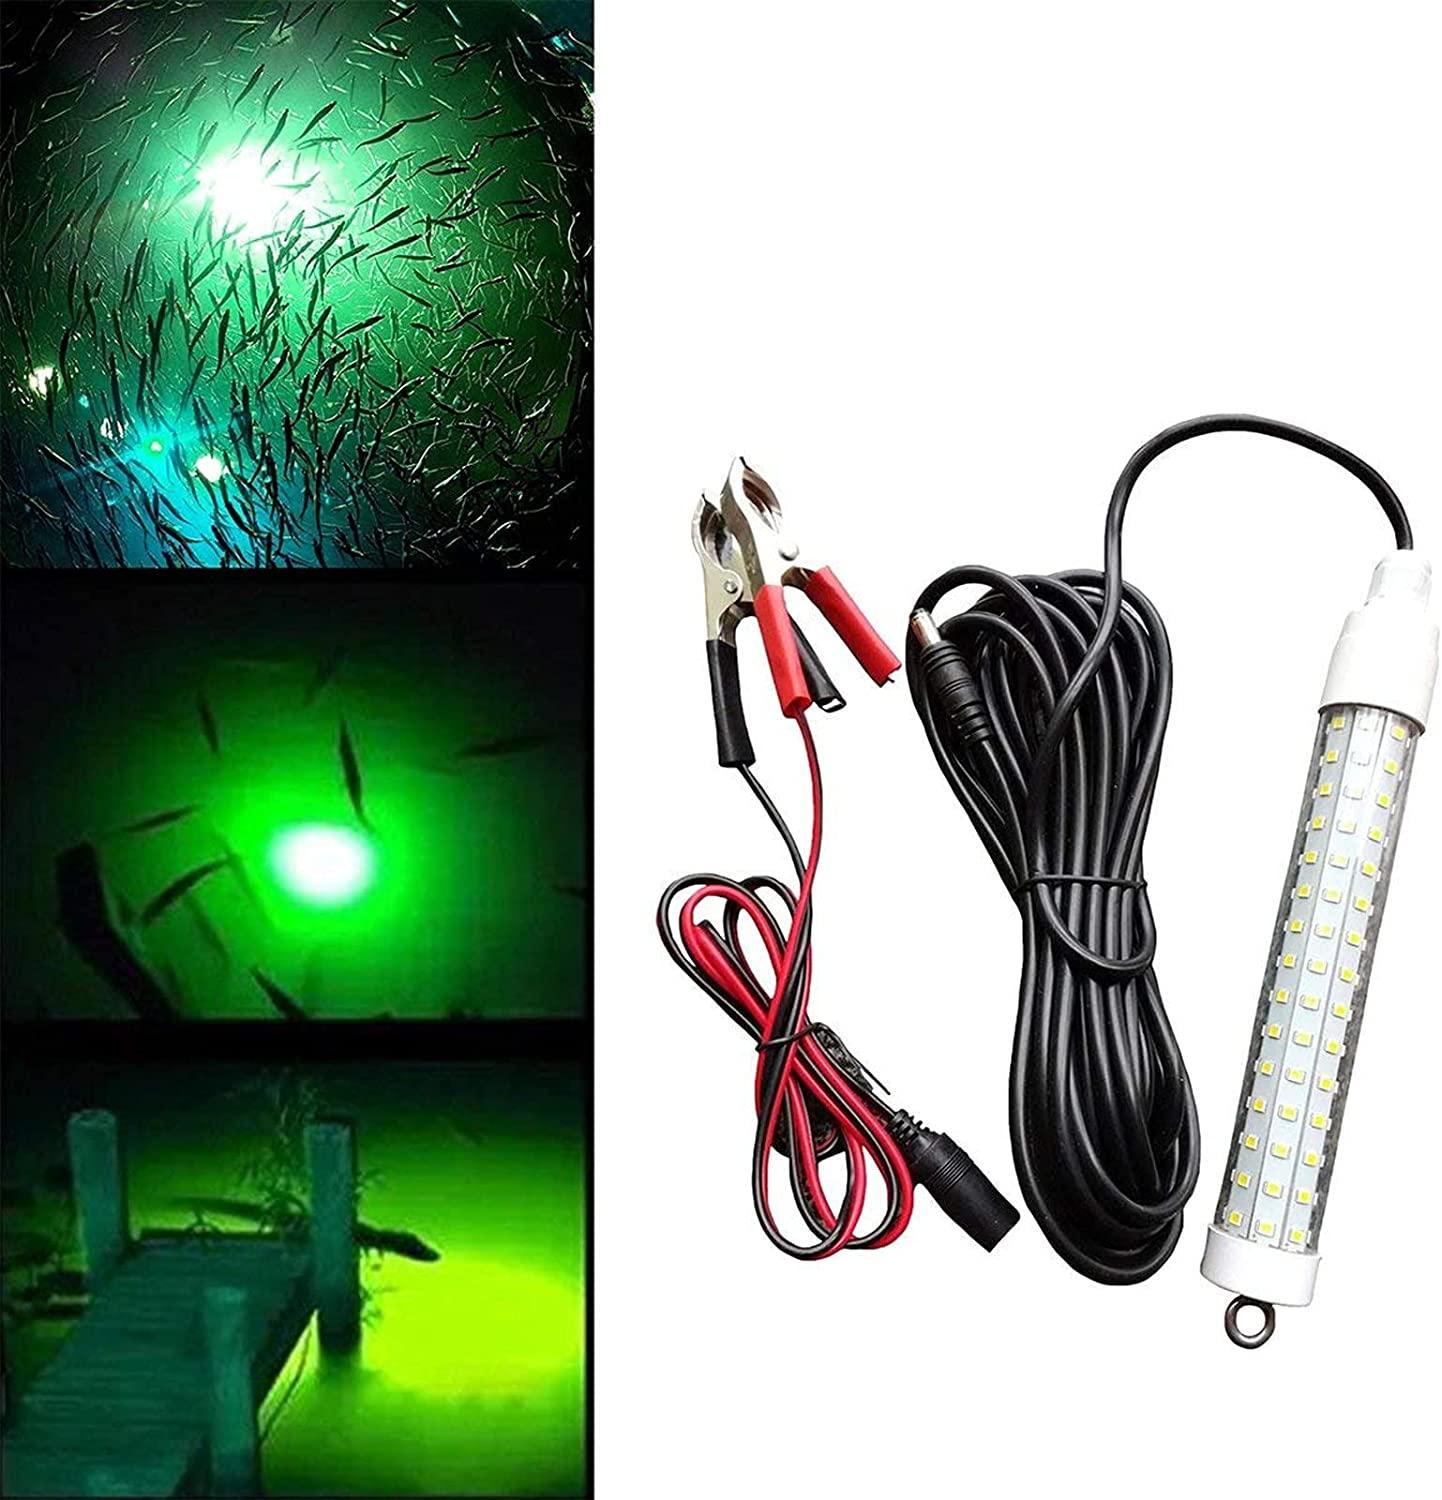 12V 120 LED Submersible Fishing Light Underwater Fish Finder Lamp, Night  Fishing Lure Bait Finder Crappie Boat Ice Fishing Light Attractants More  Fish in Freshwater & Saltwater, with 6M Power Cord